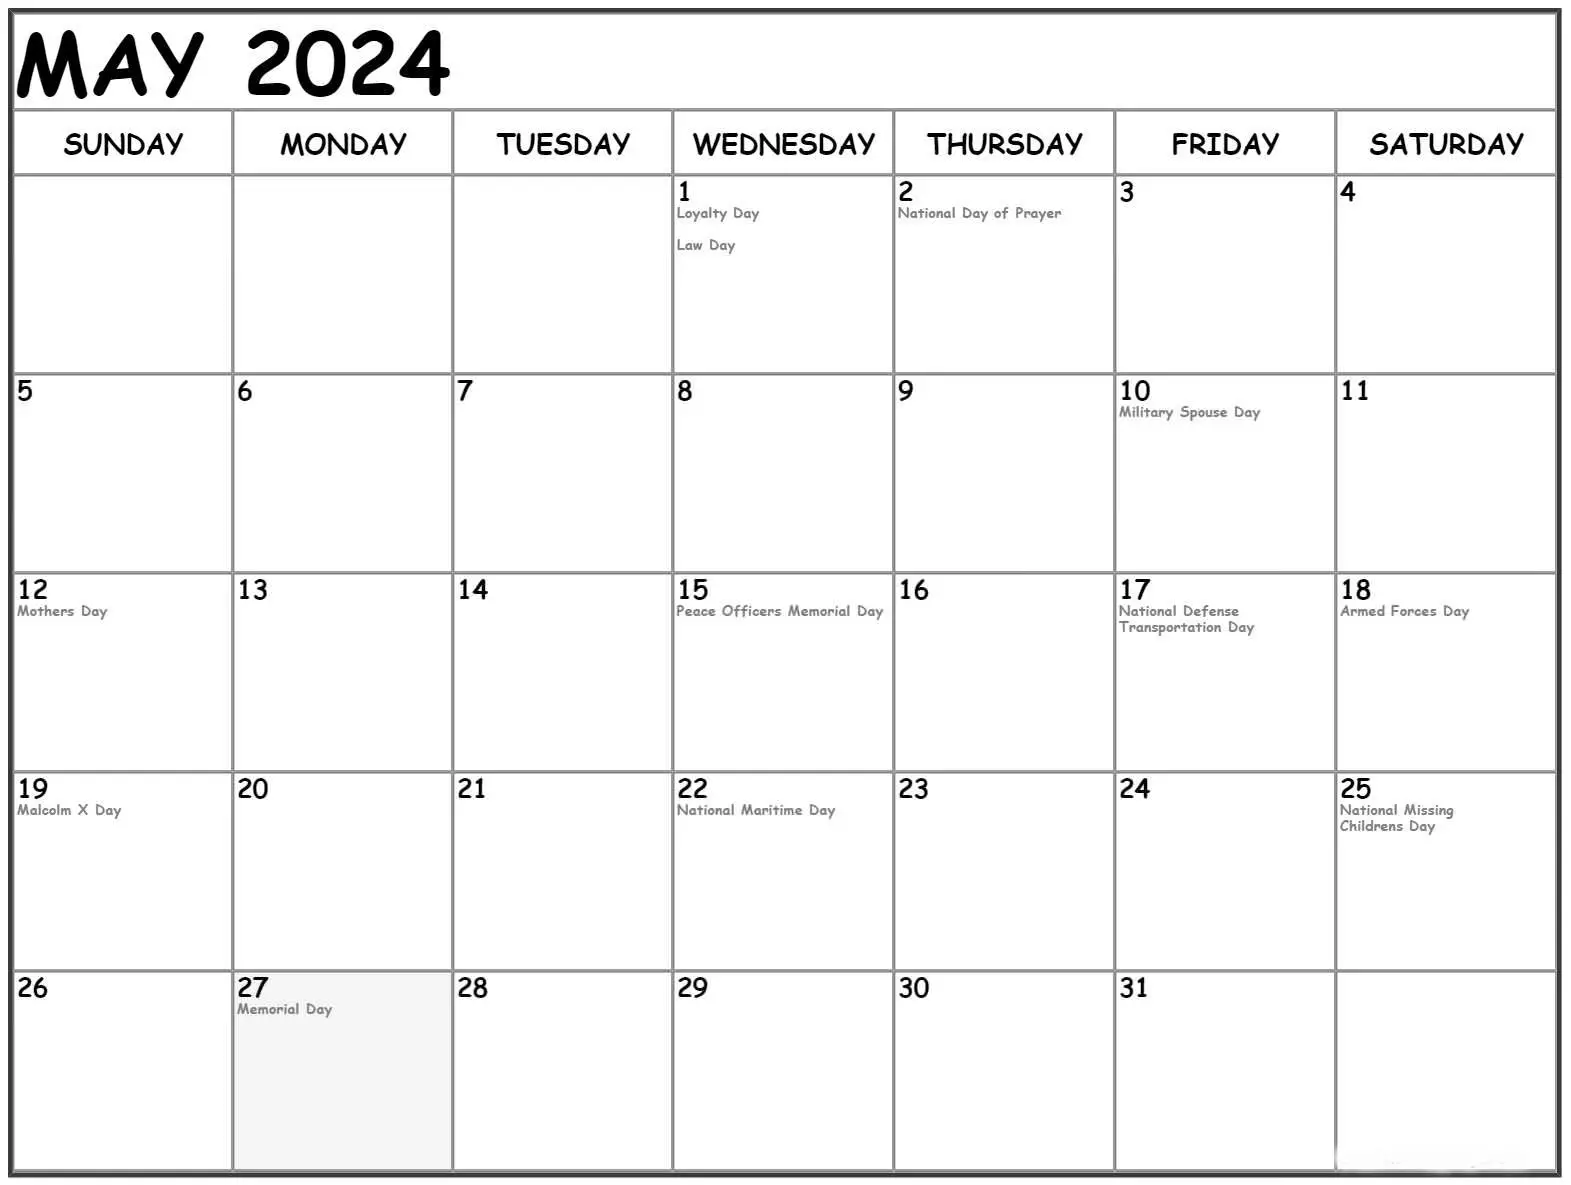 May 2024 Calendar With US Holidays